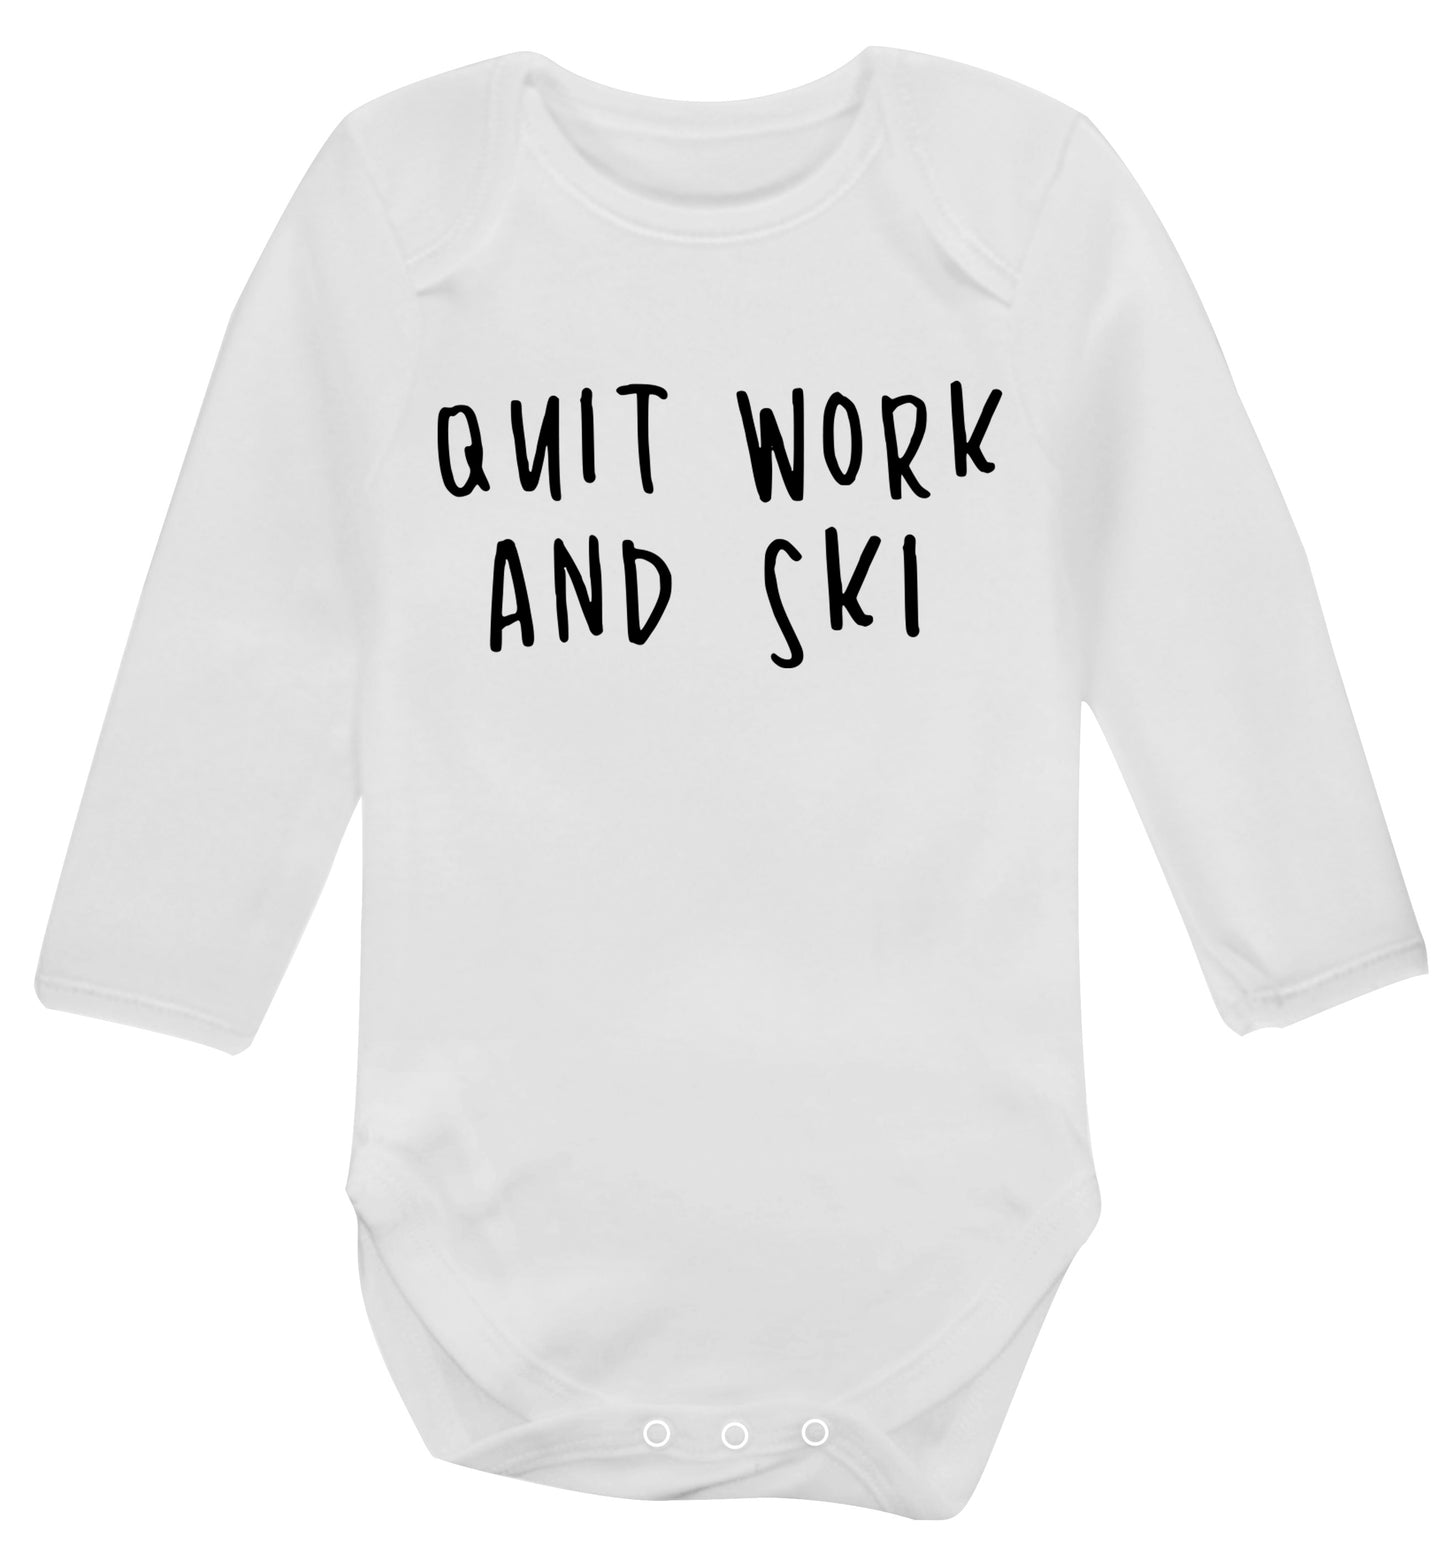 Quit work and ski Baby Vest long sleeved white 6-12 months